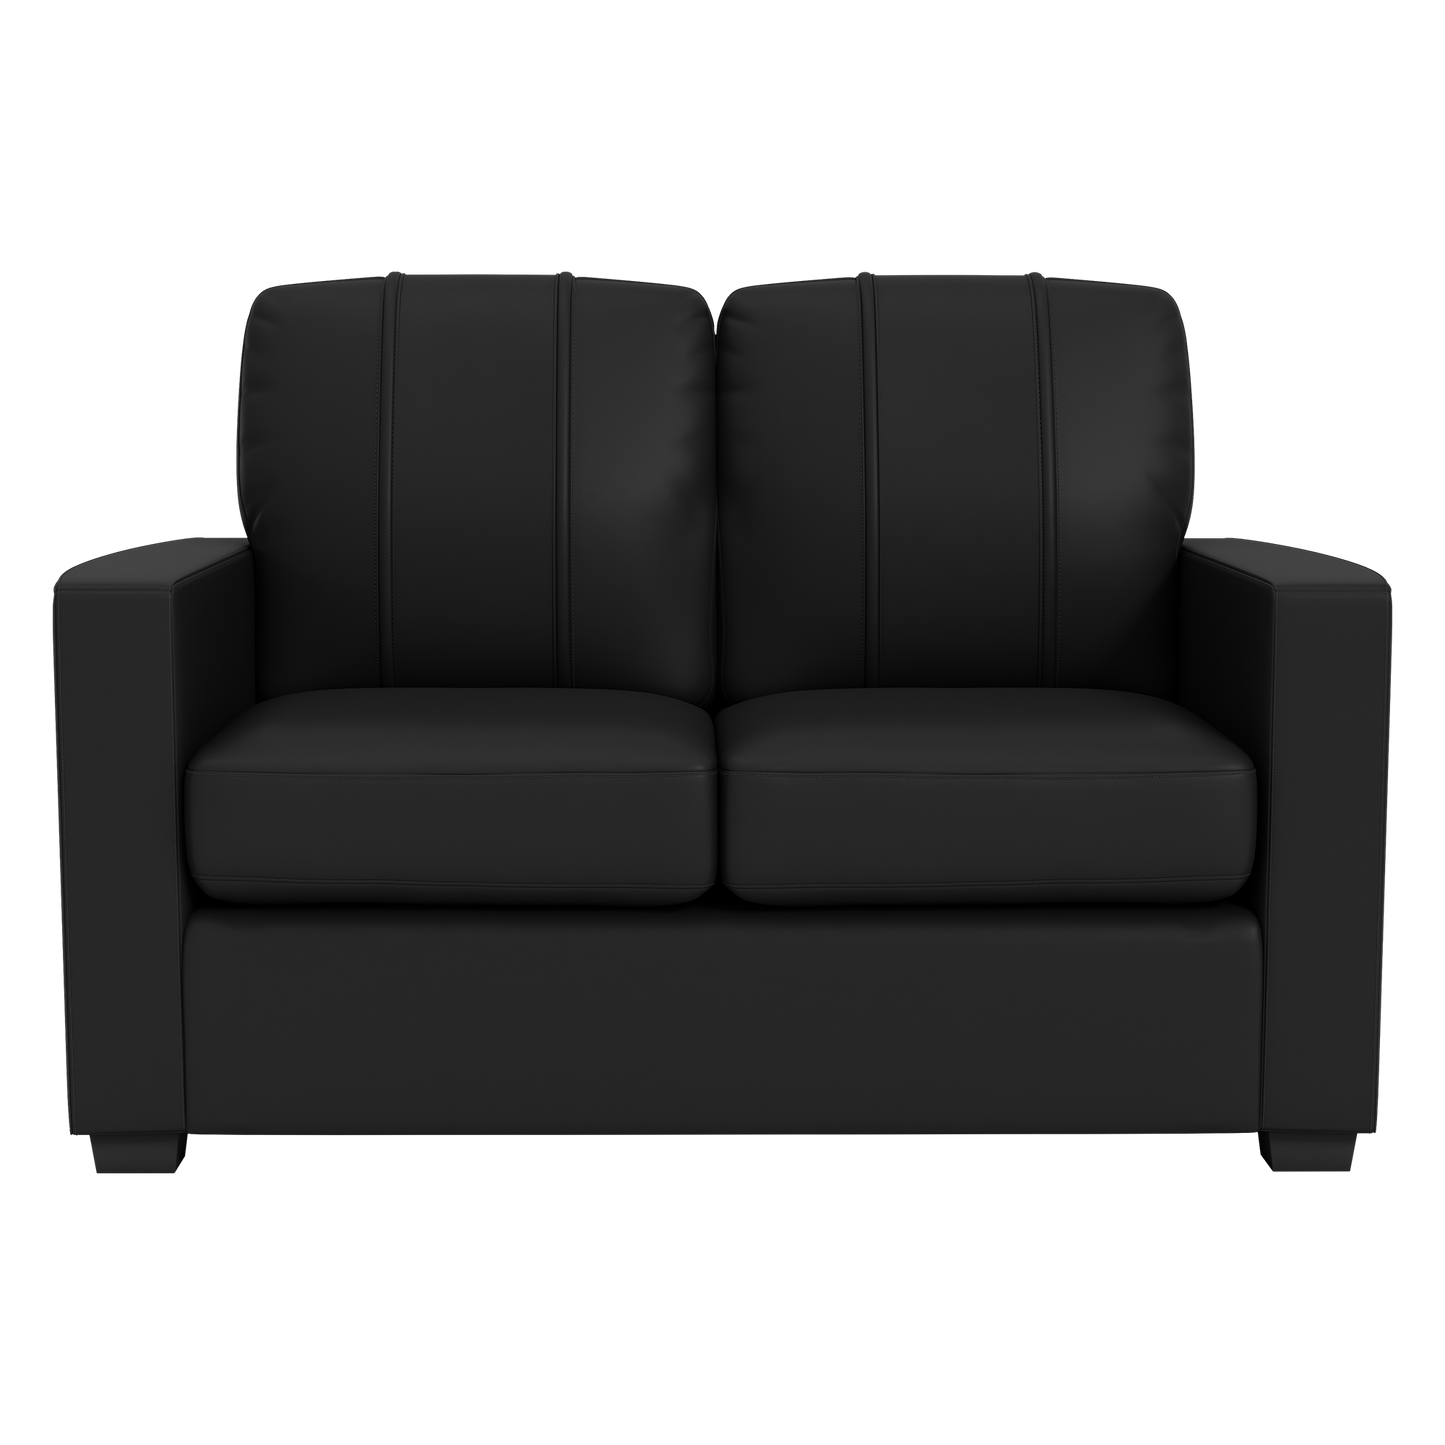 Silver Loveseat with Knicks Gaming Secondary Logo